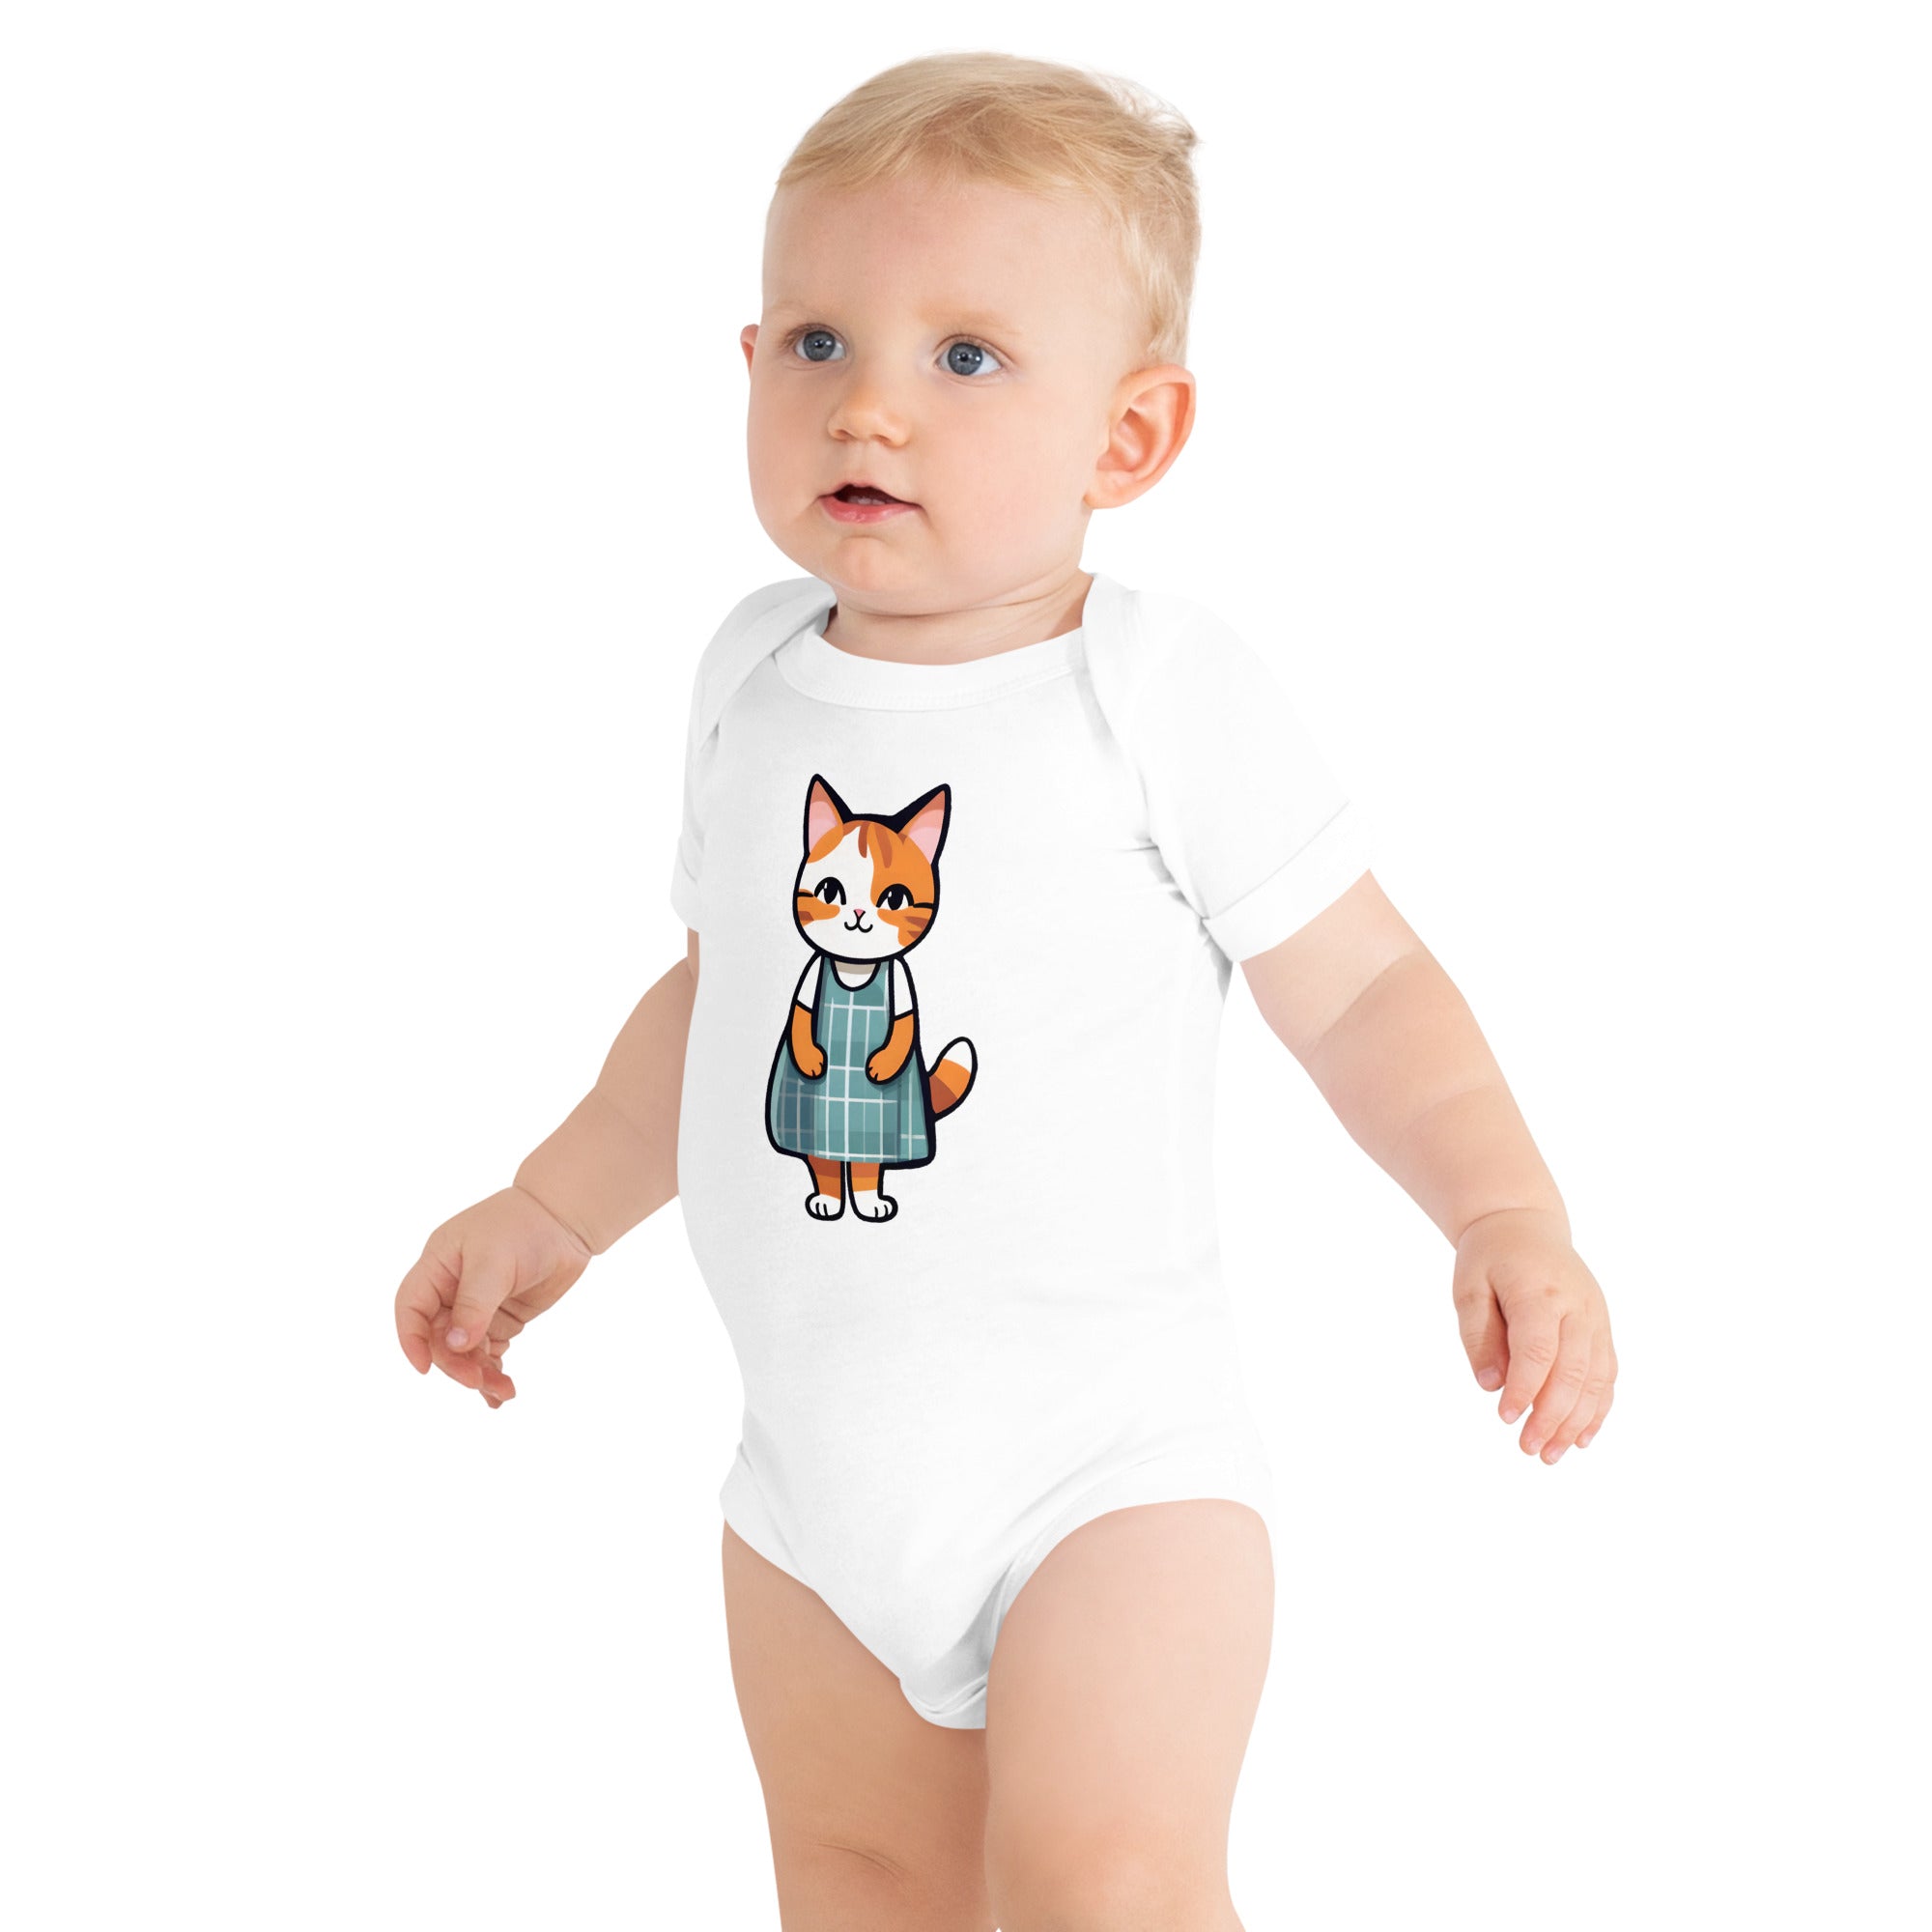 Cat in an Apron Dress Baby Short Sleeve One Piece